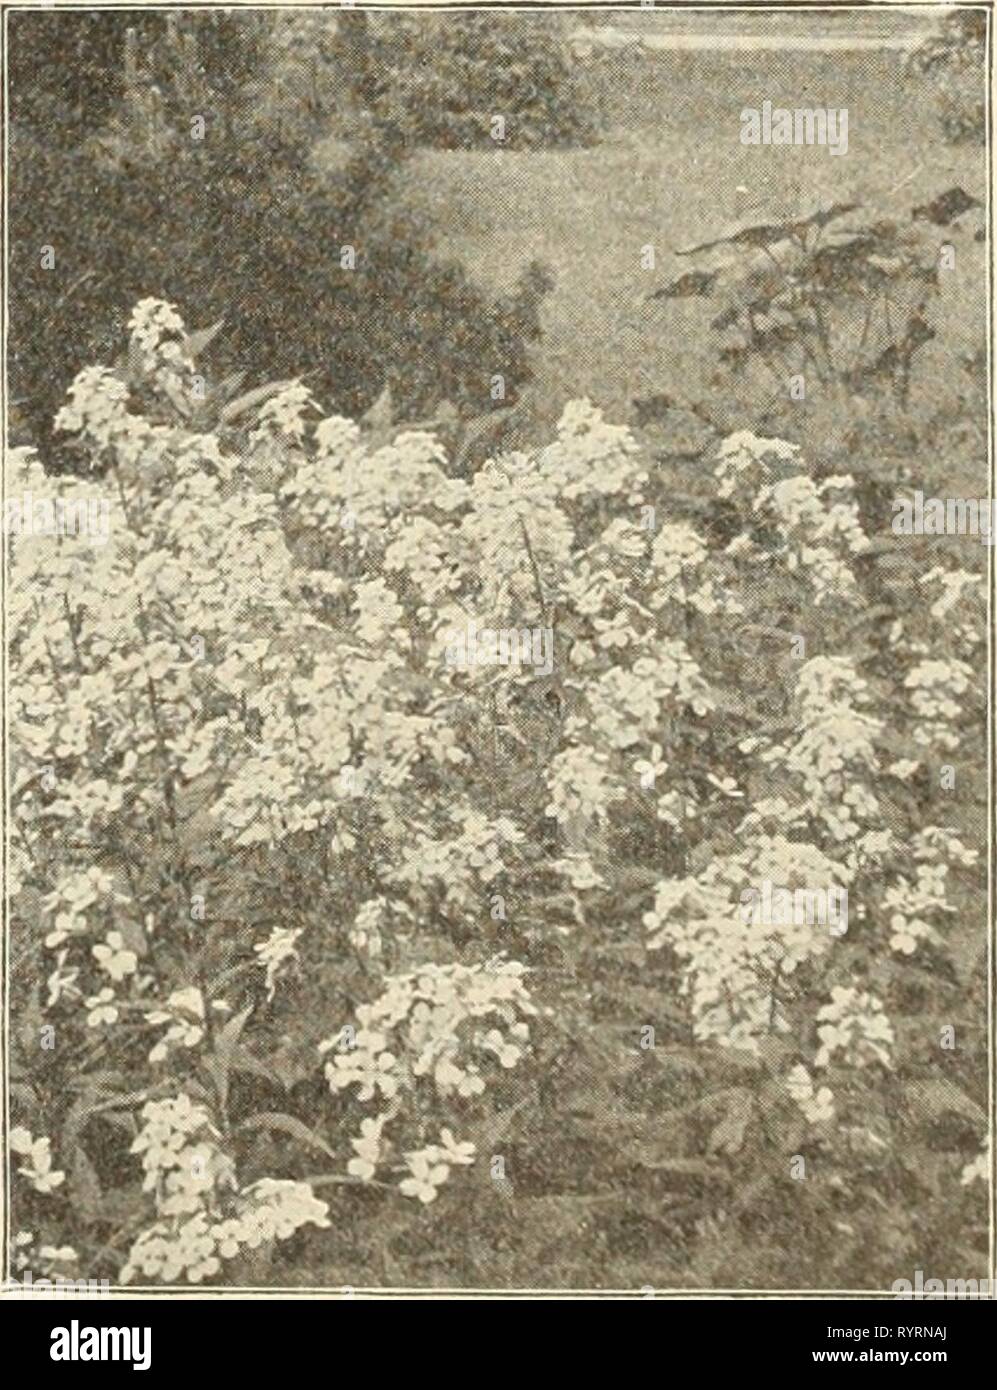 Dreer's mid-summer catalogue 1913 (1913) Dreer's mid-summer catalogue 1913 . dreersmidsummerc1913henr Year: 1913  Sweet Rocket (Ilesperis). Per pkt. Old-fashioned hardy garden plant, also known as Dame's Rocket and Dame's Violet; grows 2 to 3 feet high and bears showy white, lilac and purple fragrant flowers. Mixed colors. Fer oz., 30 cts. 5 Tritoma. Hybrida (Red-Hot PoUer. Flame Flower or Torch Lilii) Saved from our own collection, which is undoubtedly the finest in this country Tunica. Saxifraga. A neat, tufted hardy perennial plant, growing but a few inches high and bearing throughout the e Stock Photo